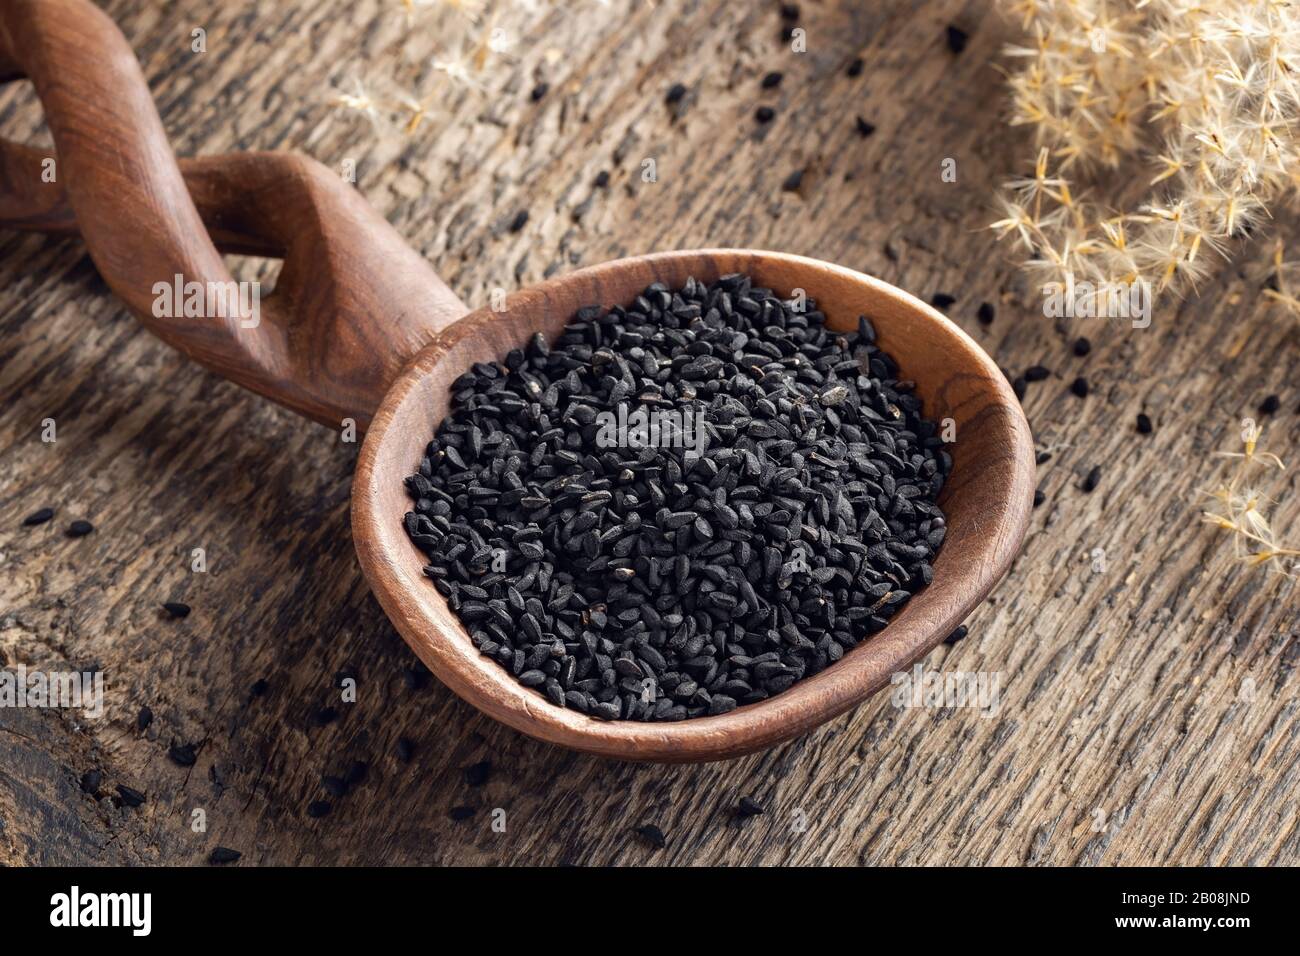 Black cumin, or Nigella sativa seeds on a wooden spoon on a table Stock Photo